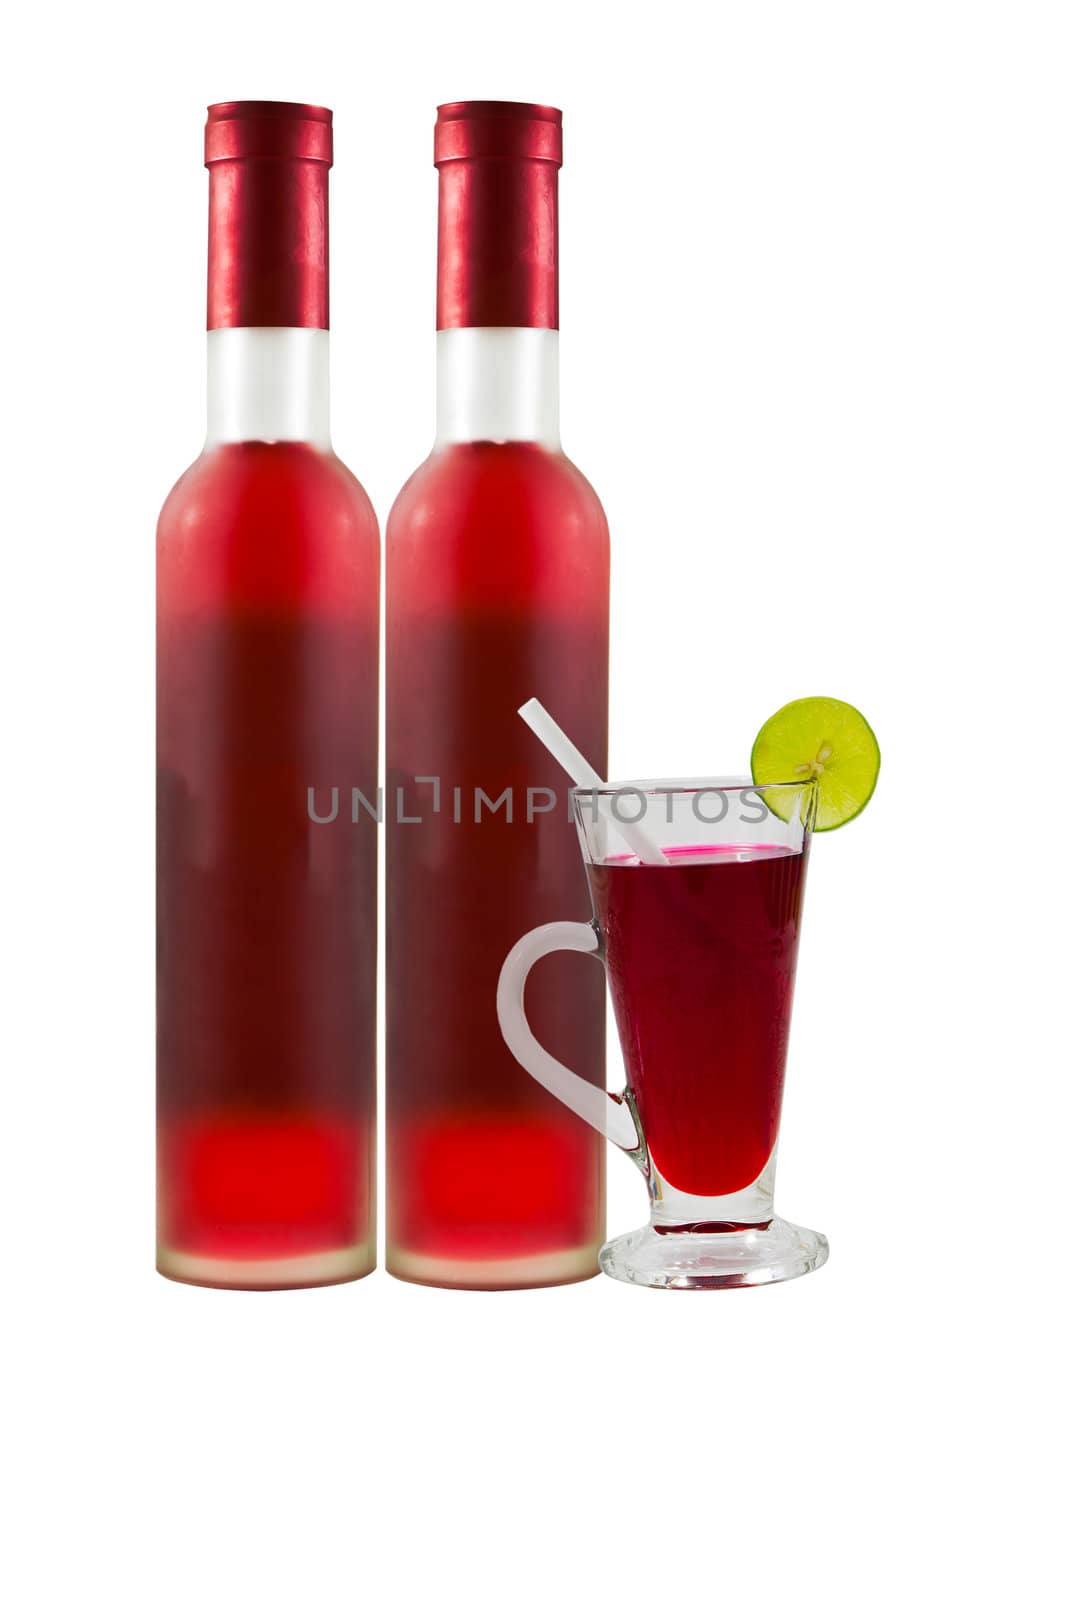 Red wine bottles and wine glass isolated on white.